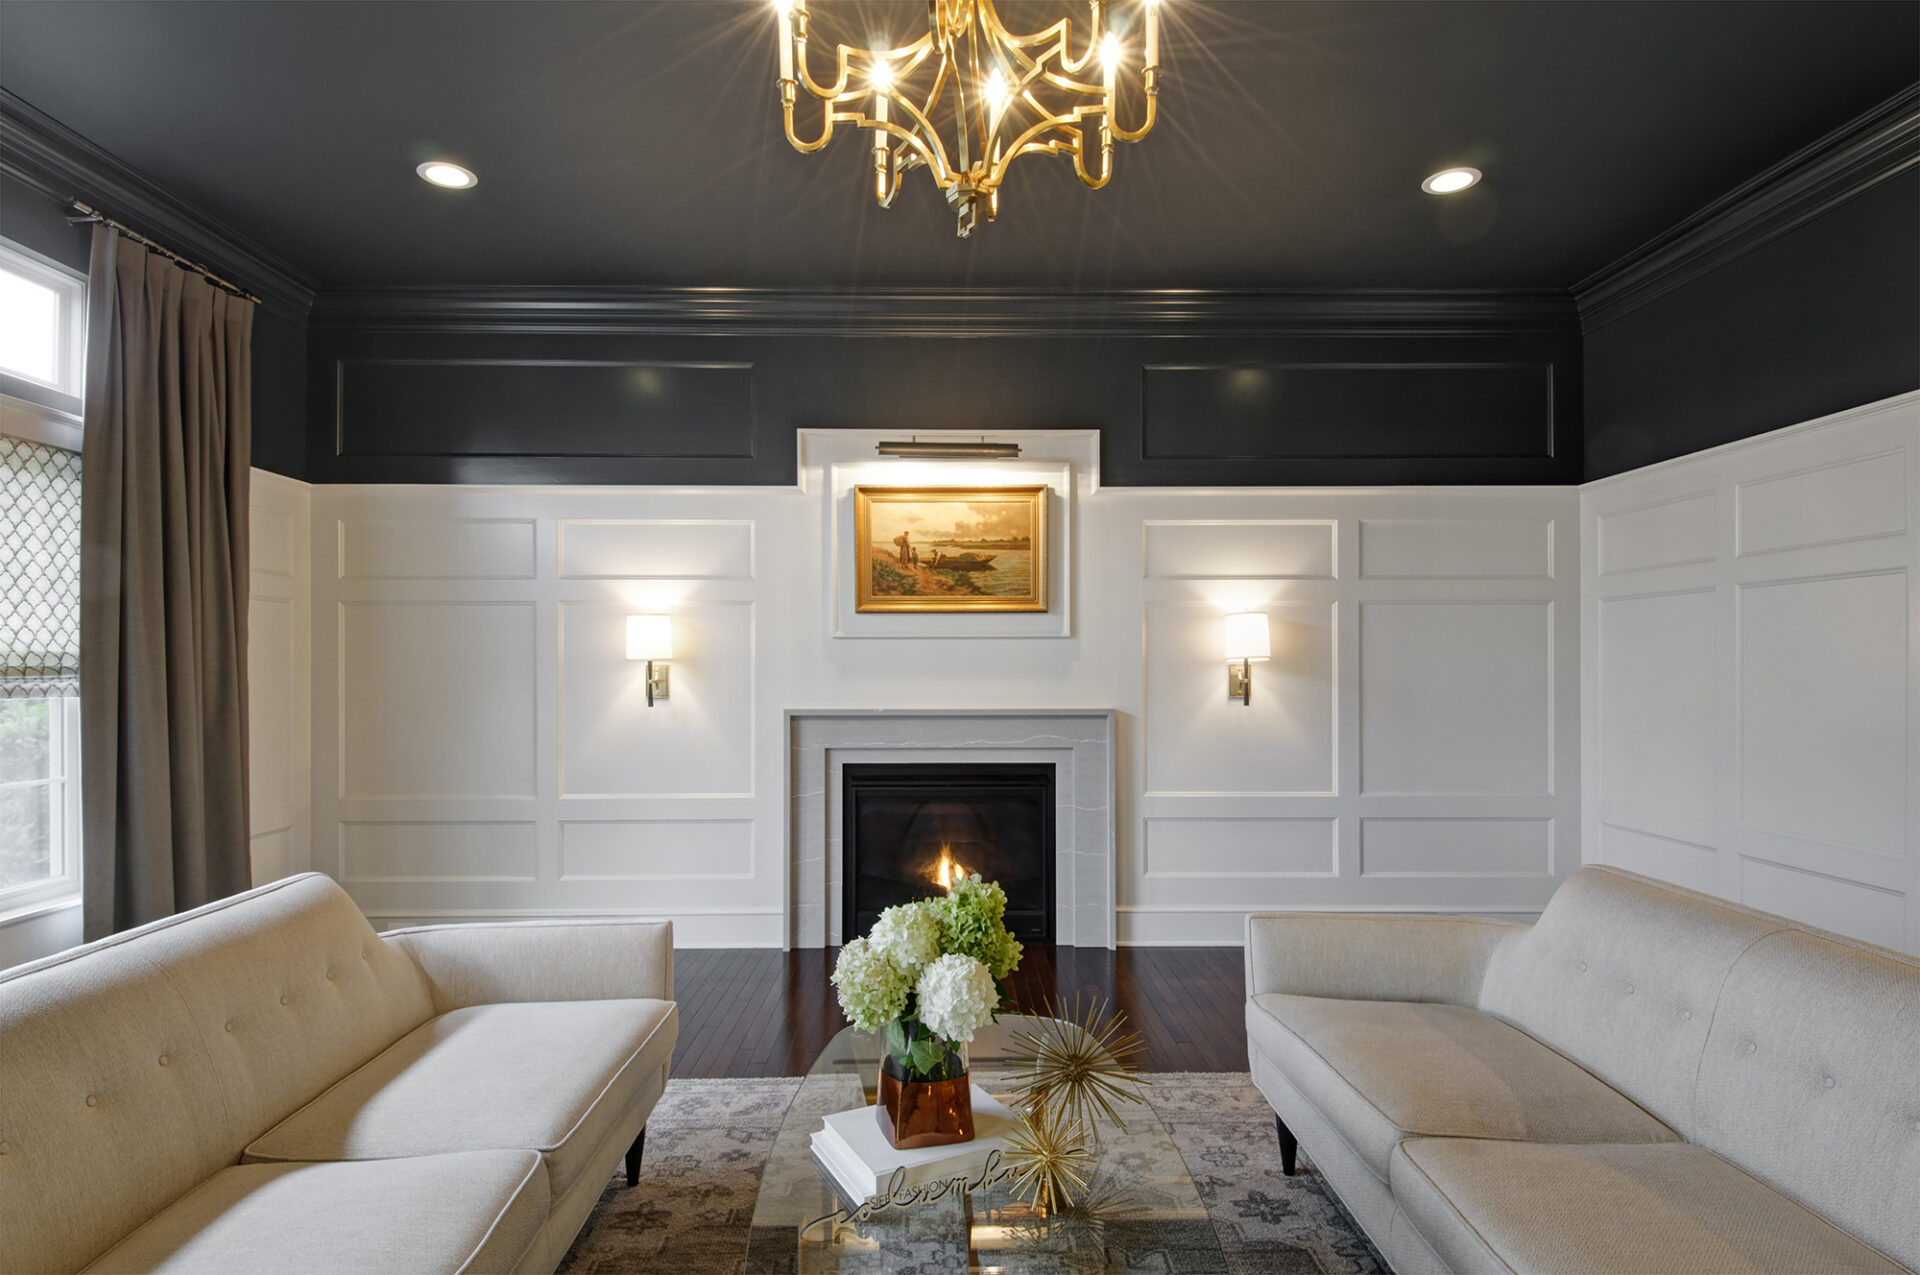 Living room, Dublin, Dave Fox, Remodel, Wainscoting, painted ceiling, gold, brass, fireplace